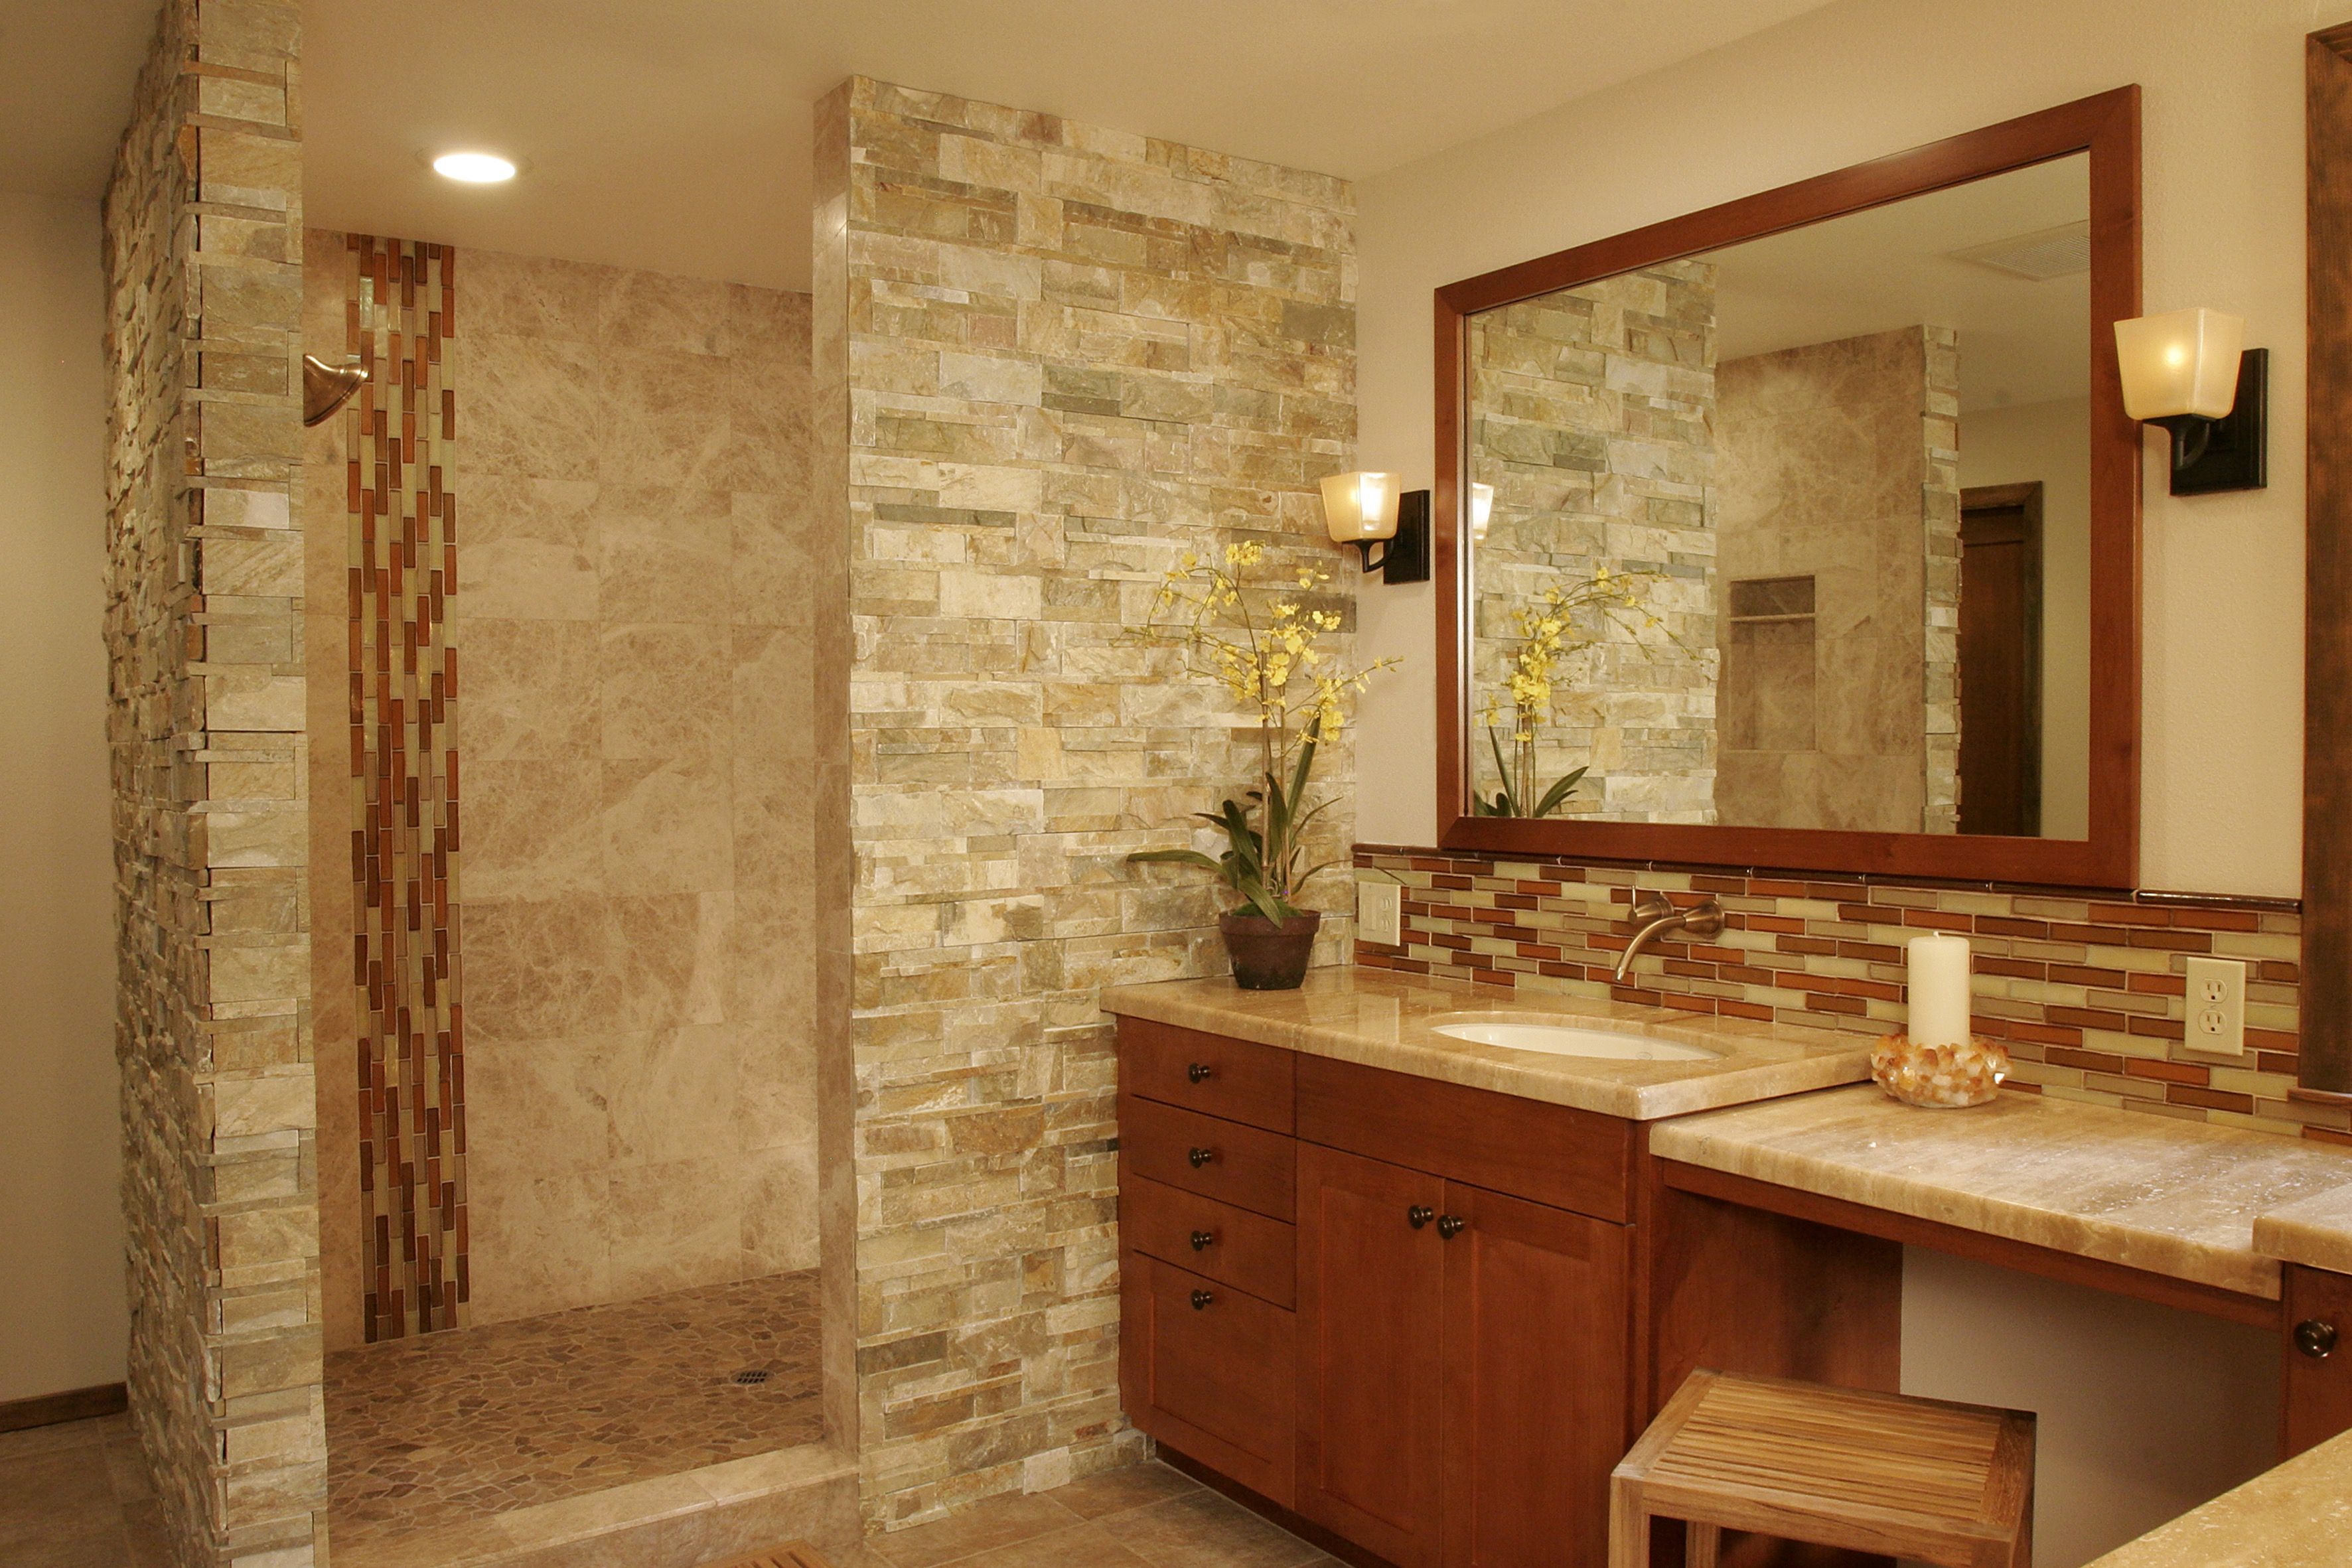 Modern Stone Bathroom Wall For Vintage Nuance (View 17 of 18)